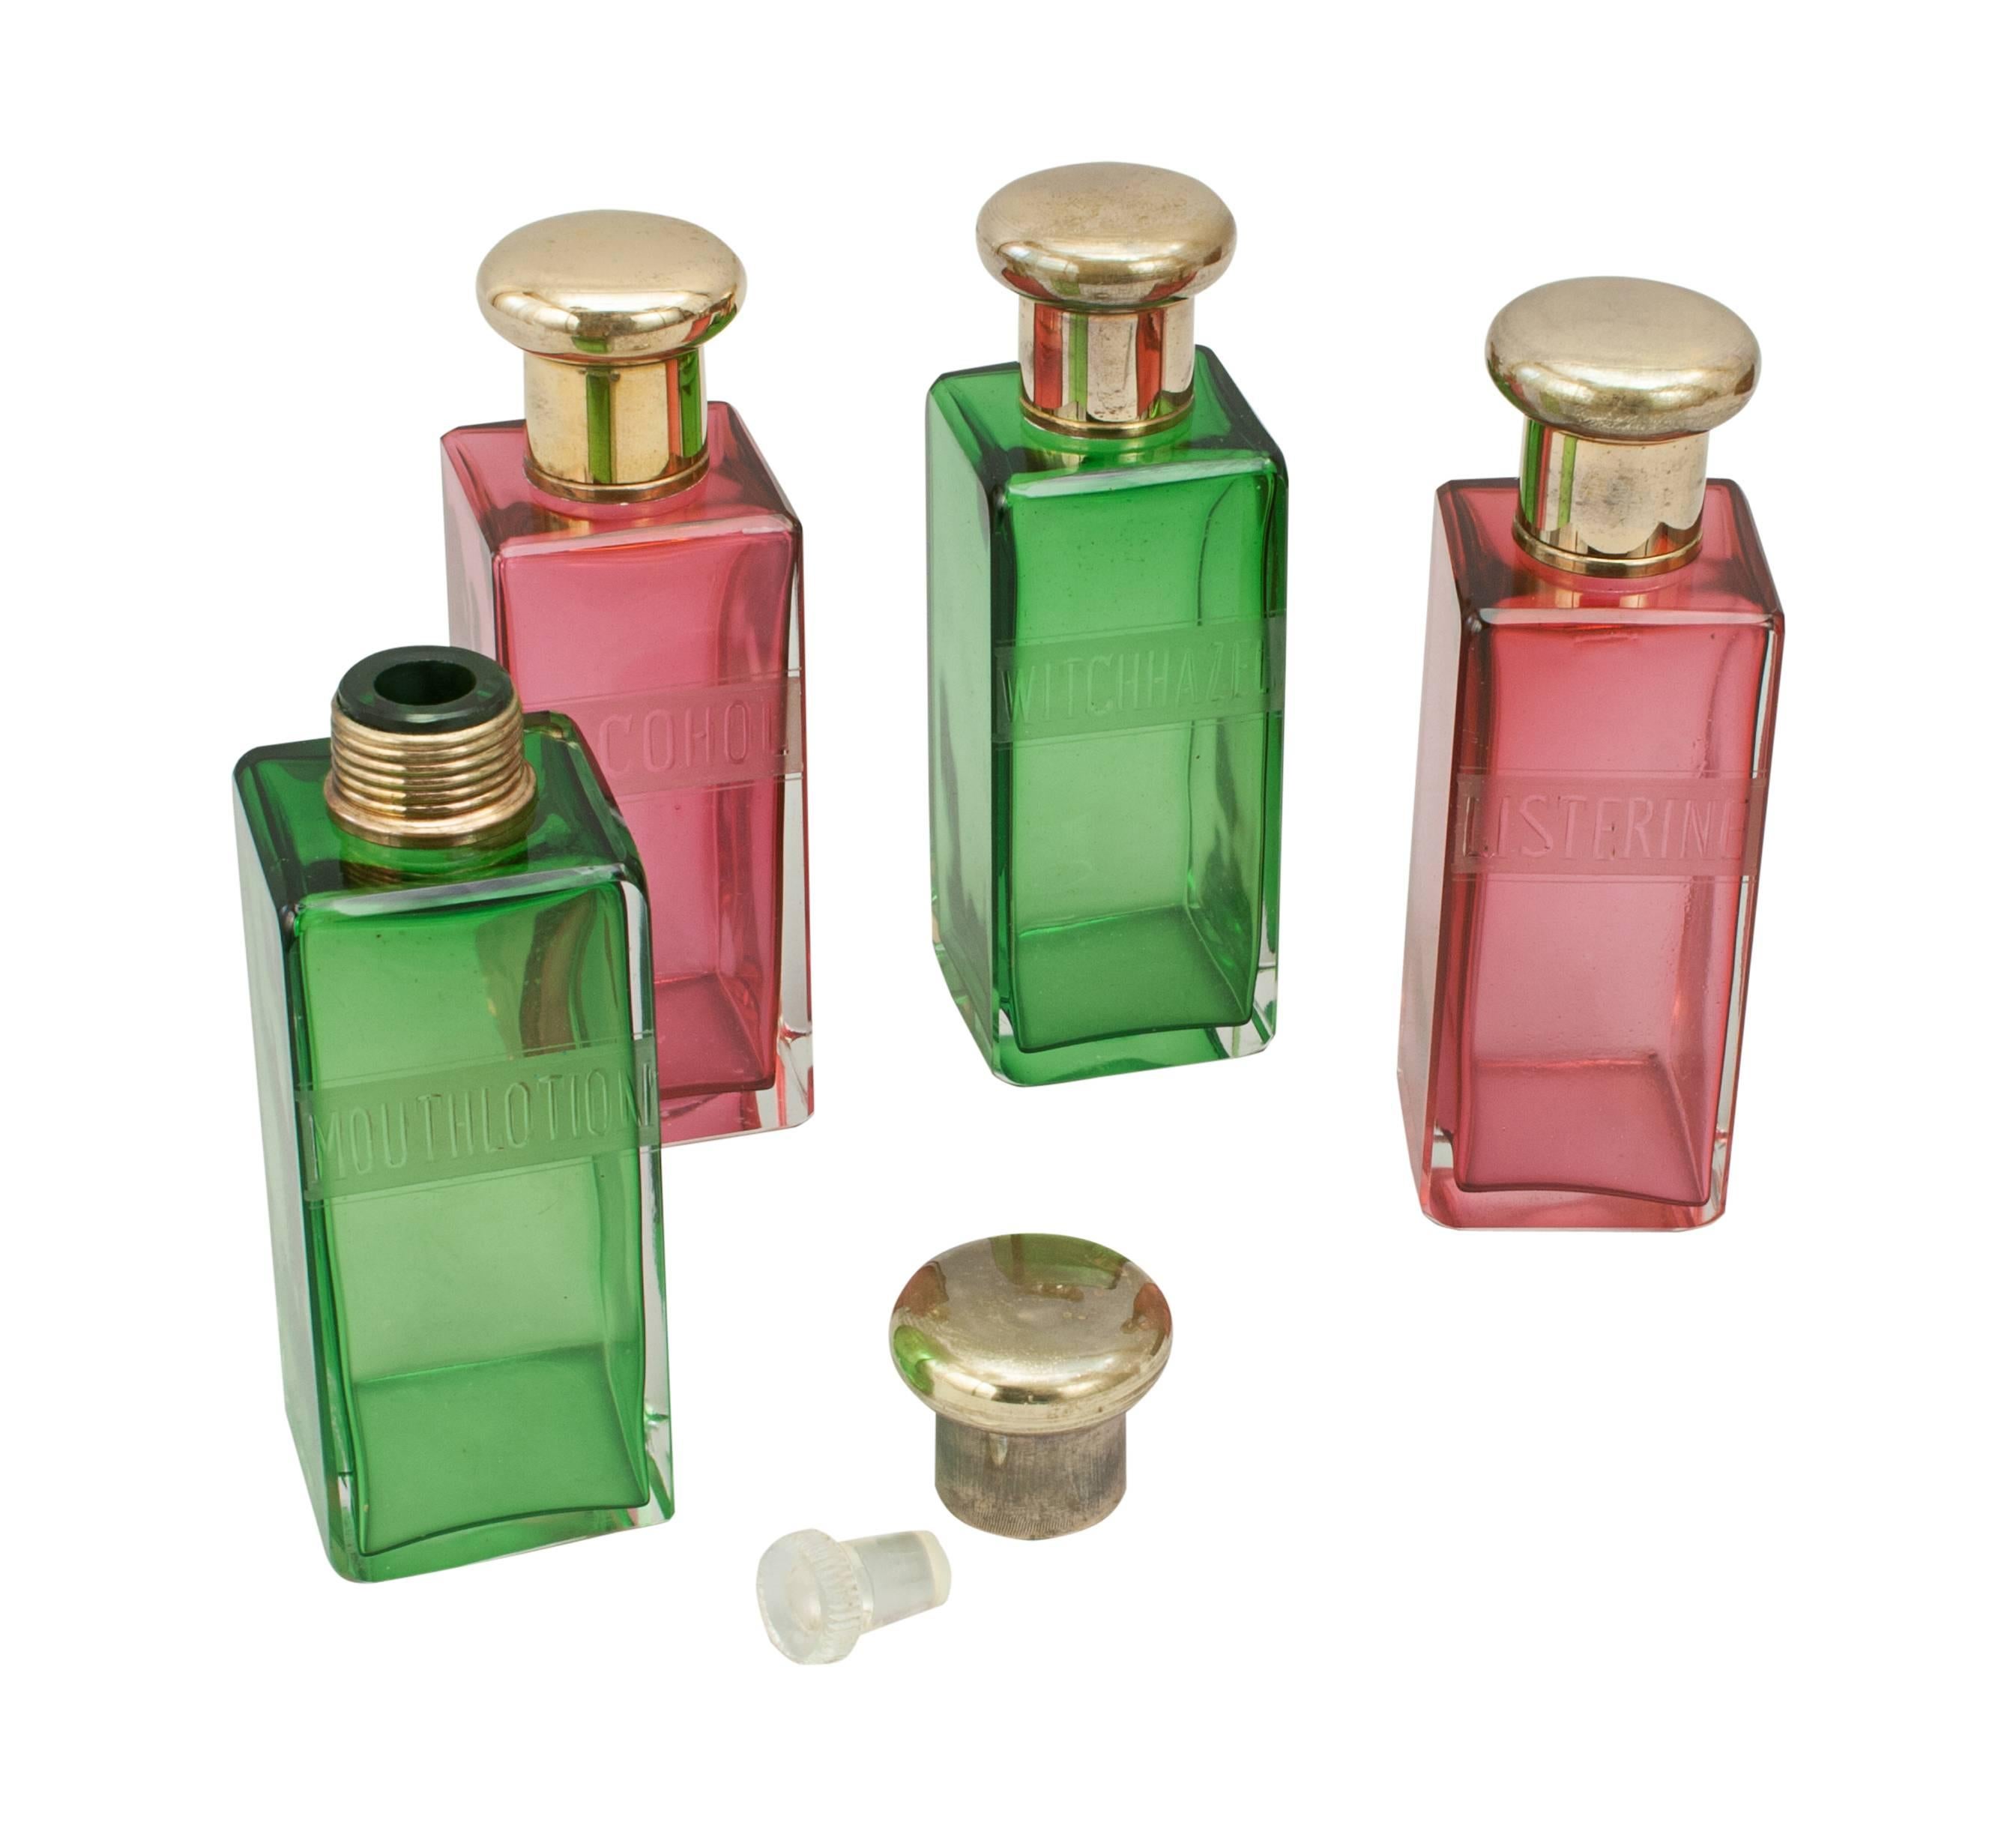 Colored remedy bottles in leather case.
Set of four vanity, toiletry, medicine glass bottles in a brown leather case. The case is fitted with a brass 'tuck-tite' clasp lock, U.S.A pat. 159C4OC, Worlds Pat's, Patent Brevete. The leather embossed